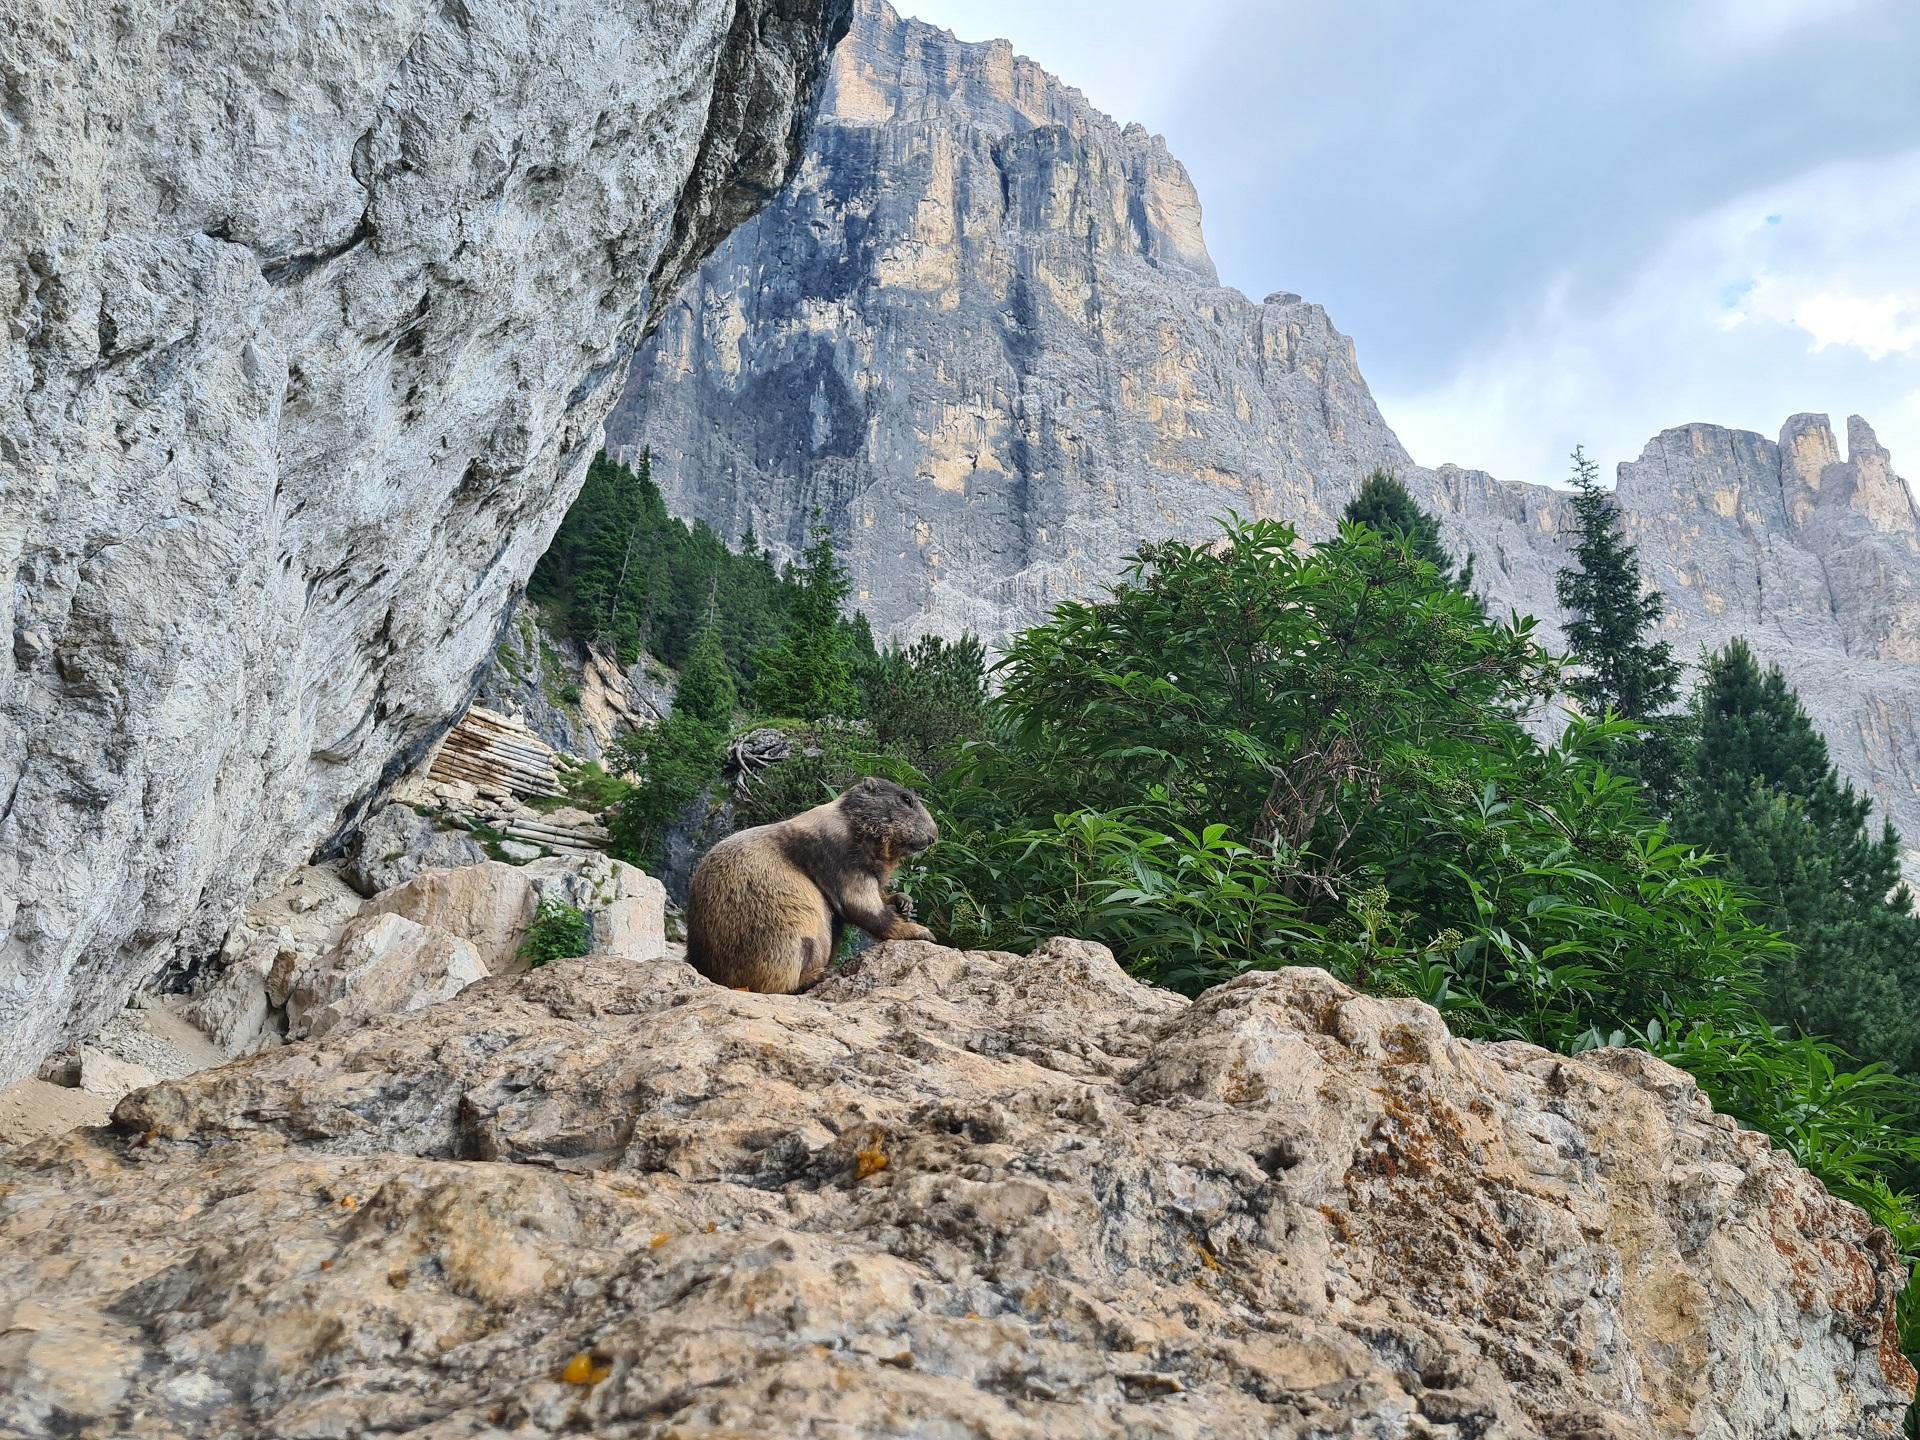 The waterfalls at Passo Sello is the best place in the Fassa Valley to see marmots